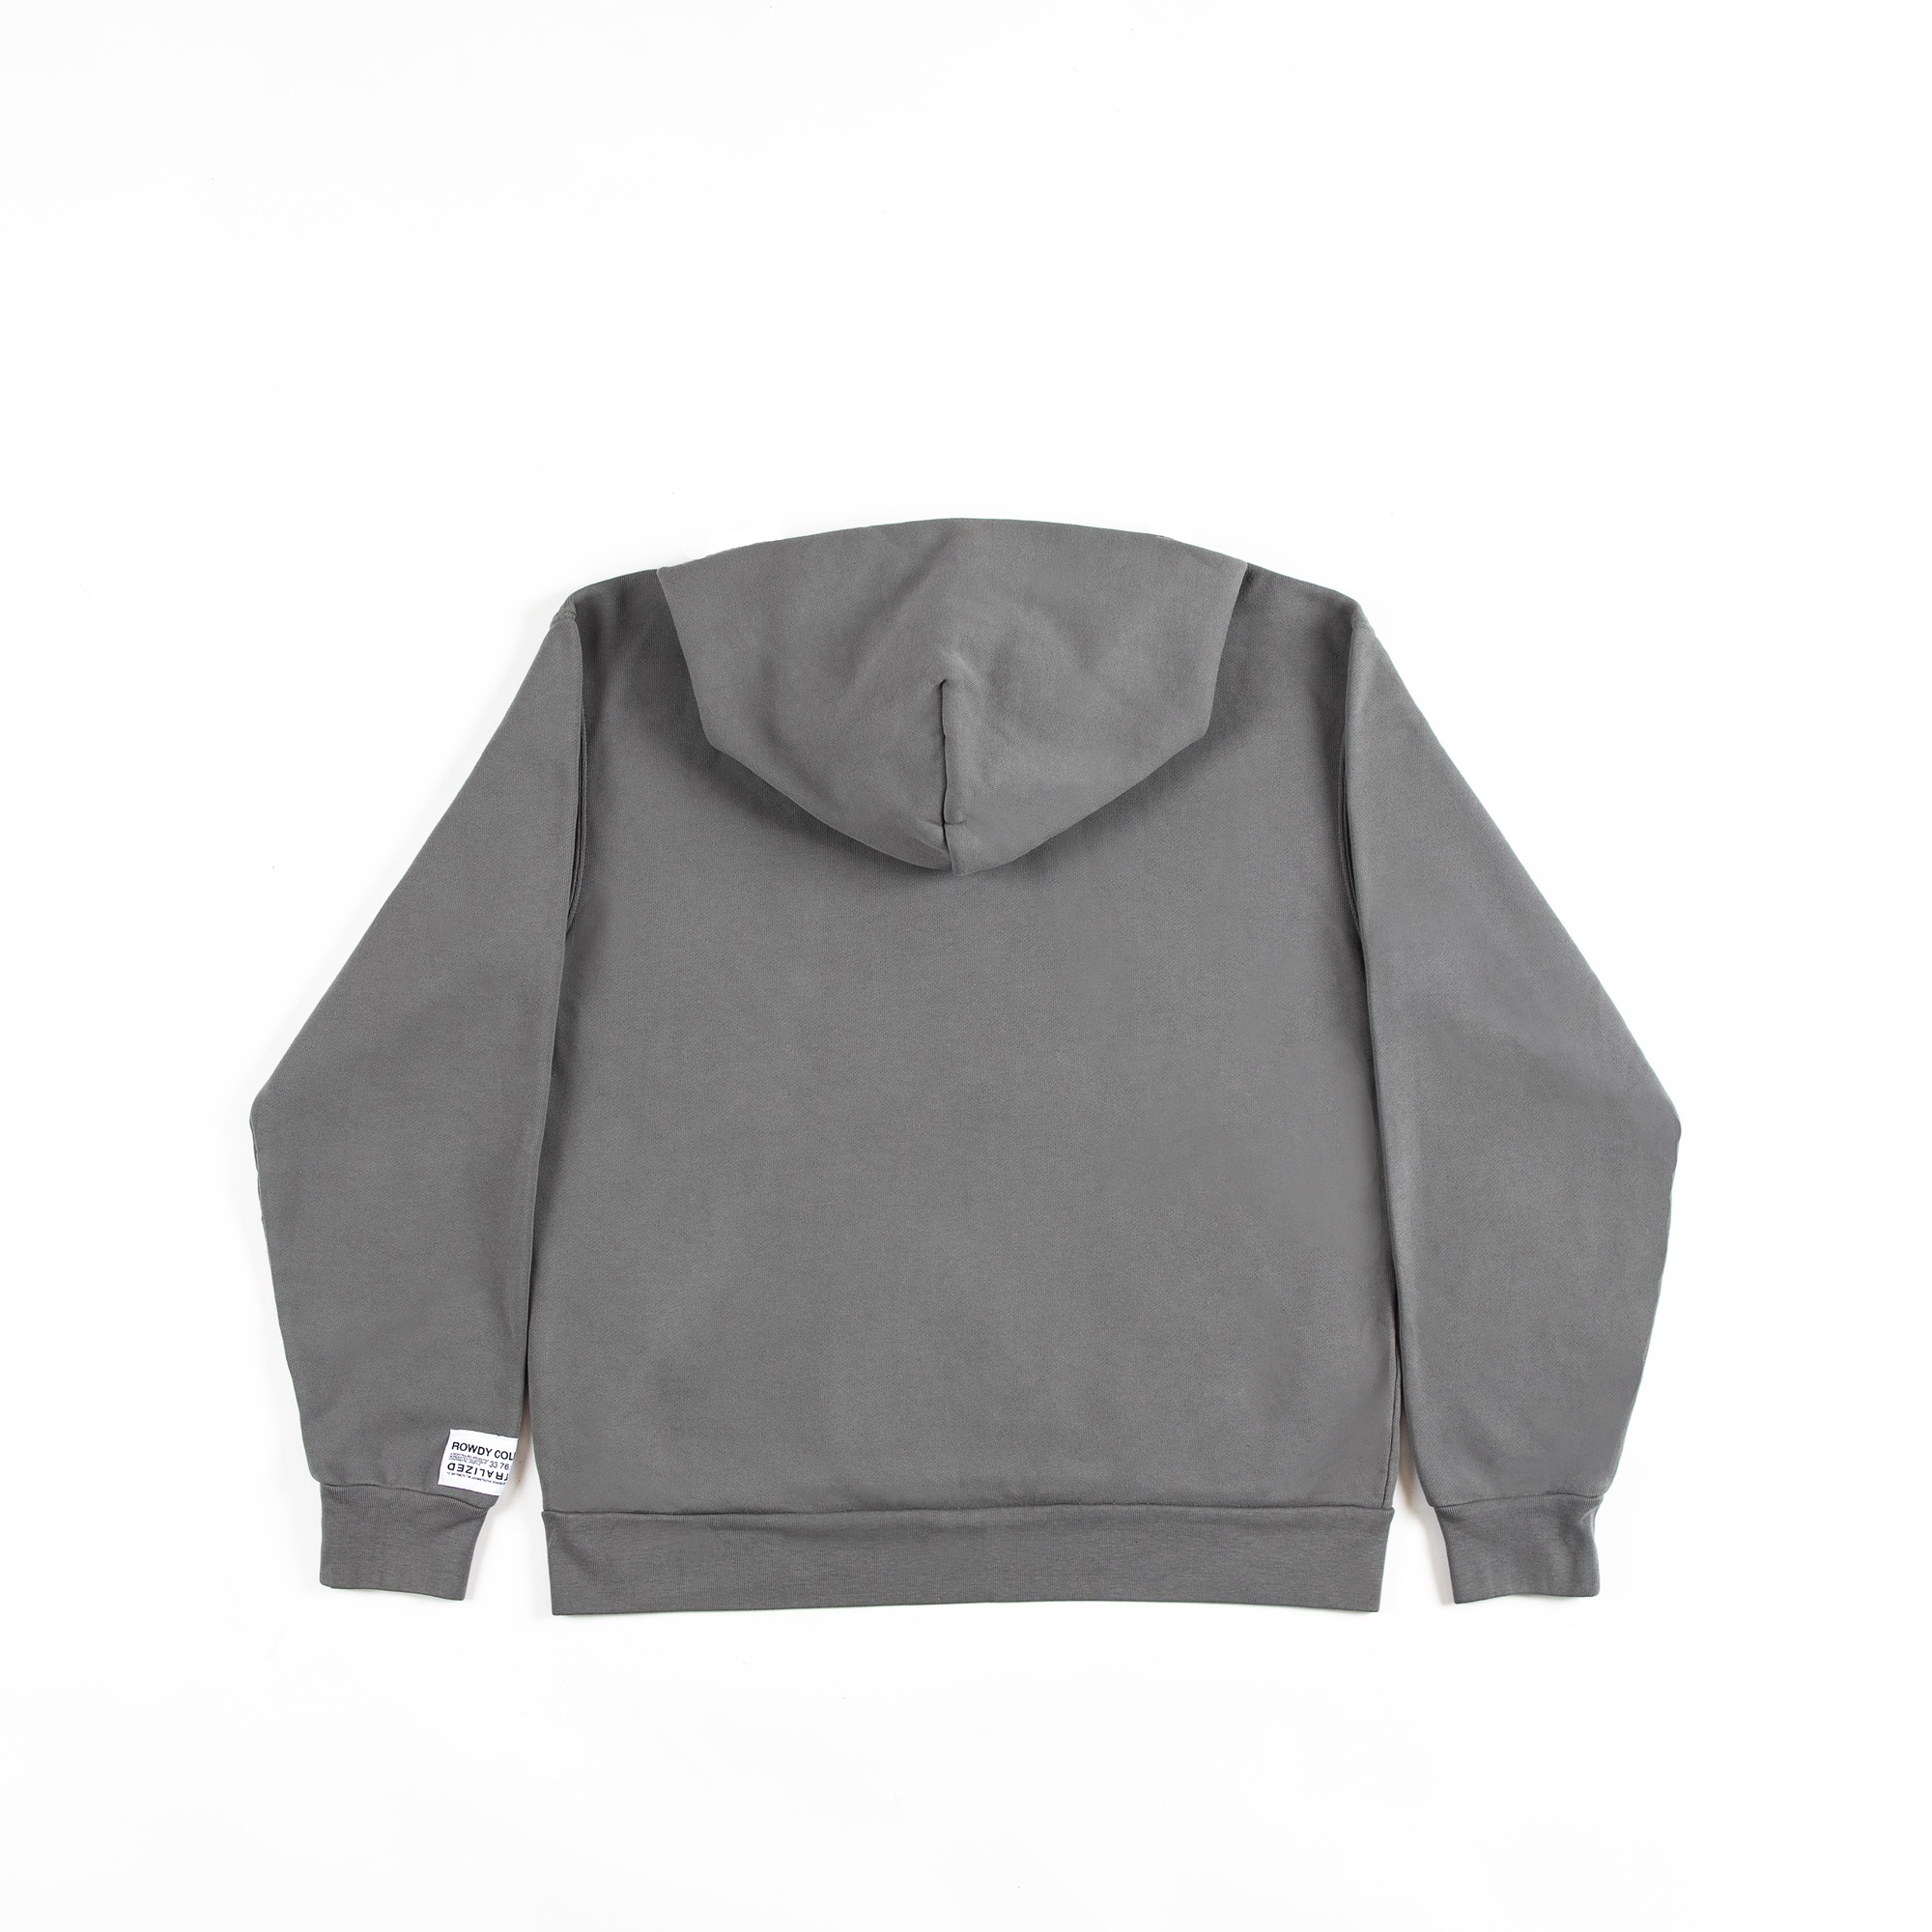 Rowdy Collection Hoodie Grey | Rowdy Shop the Rowdy Collection